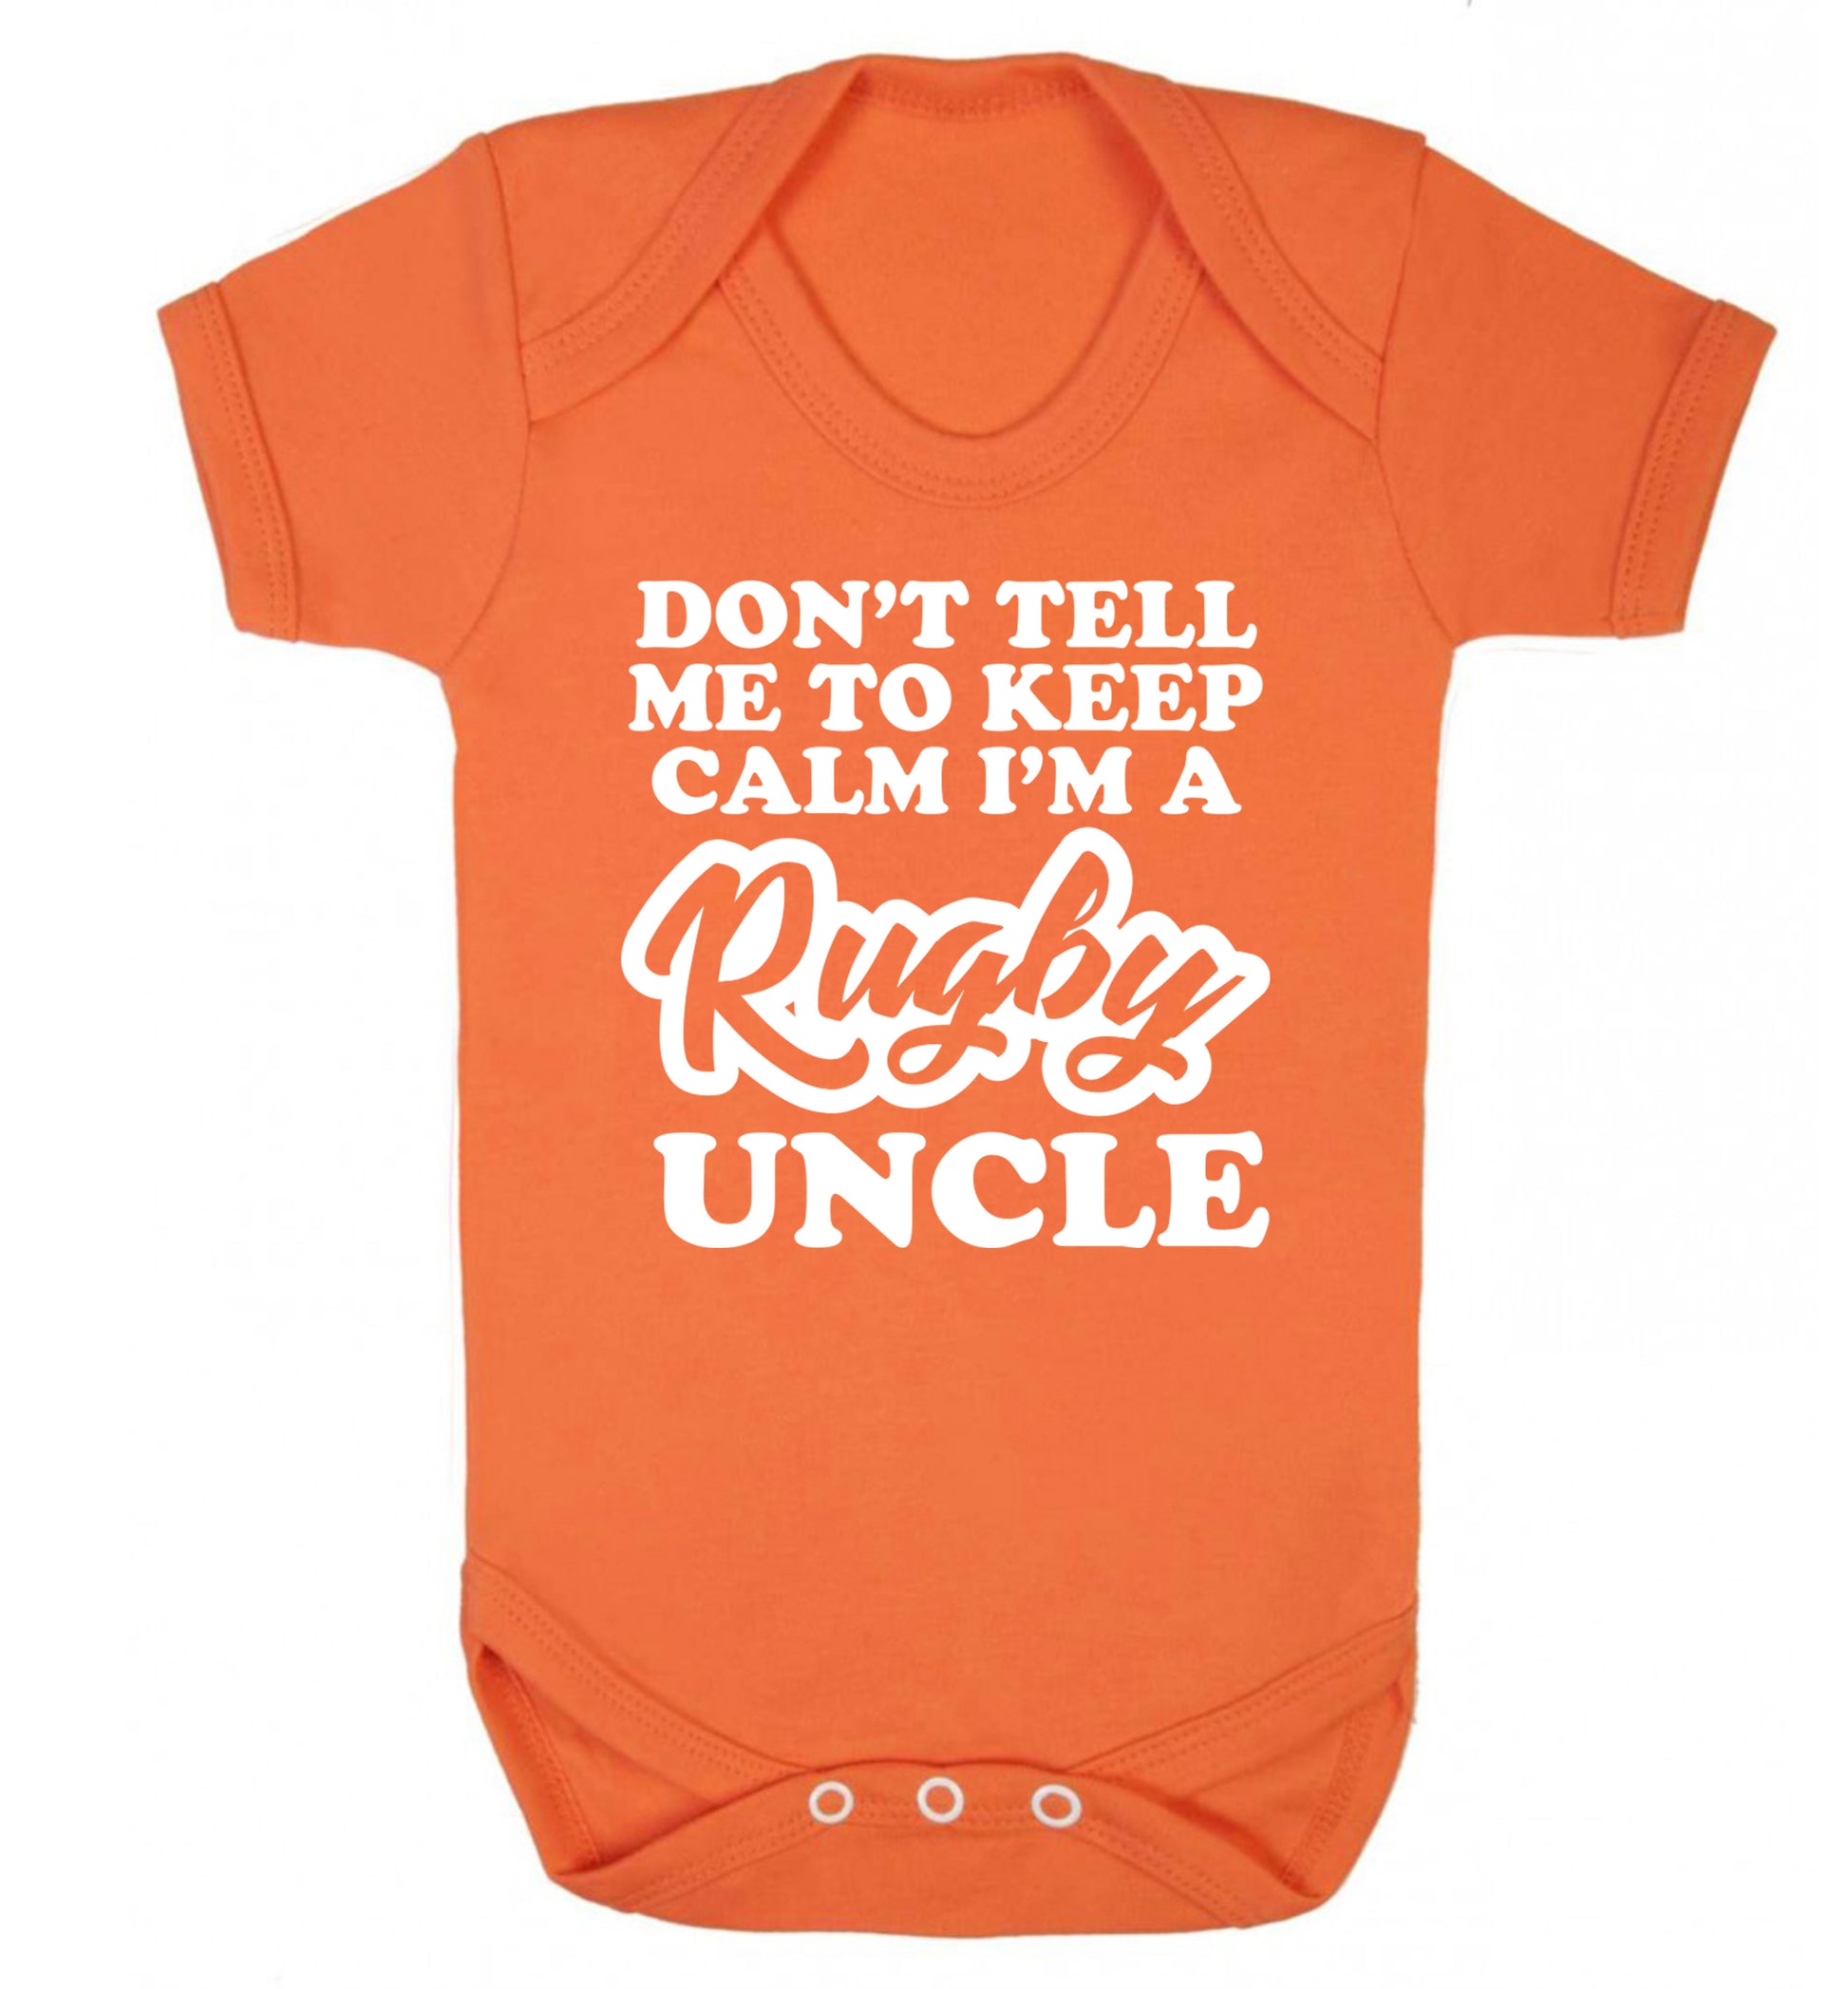 Don't tell me to keep calm I'm a rugby uncle Baby Vest orange 18-24 months